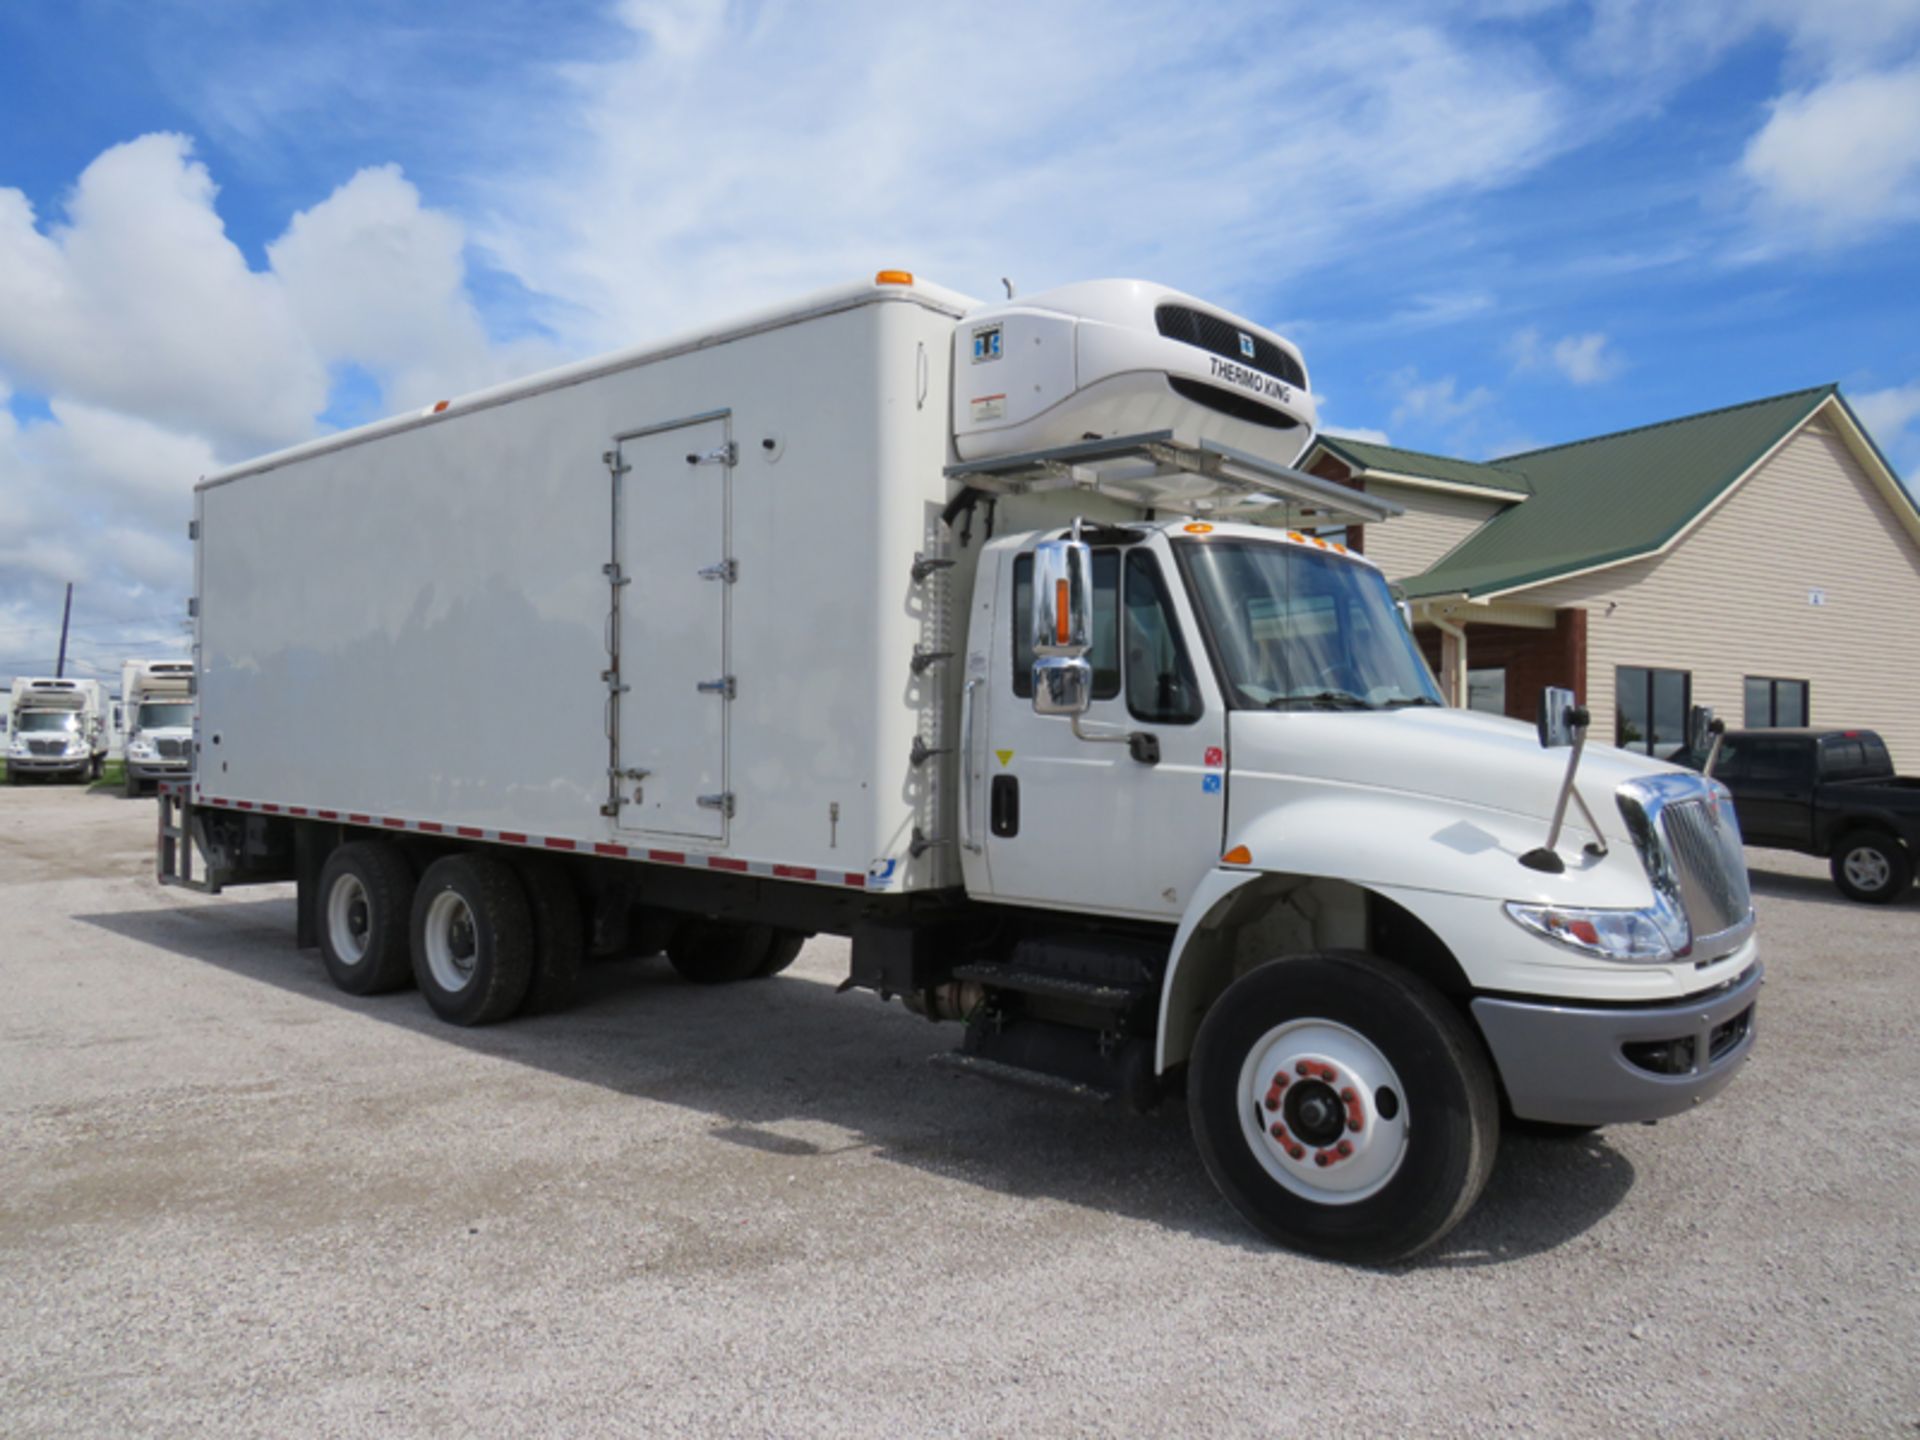 2018 INTERNATIONAL 4400 SBA 6X4 REFRIGERATED BOX TRUCK VIN#: 1HTMSTAR6JH049073, Approx Miles: 16423, - Image 3 of 8